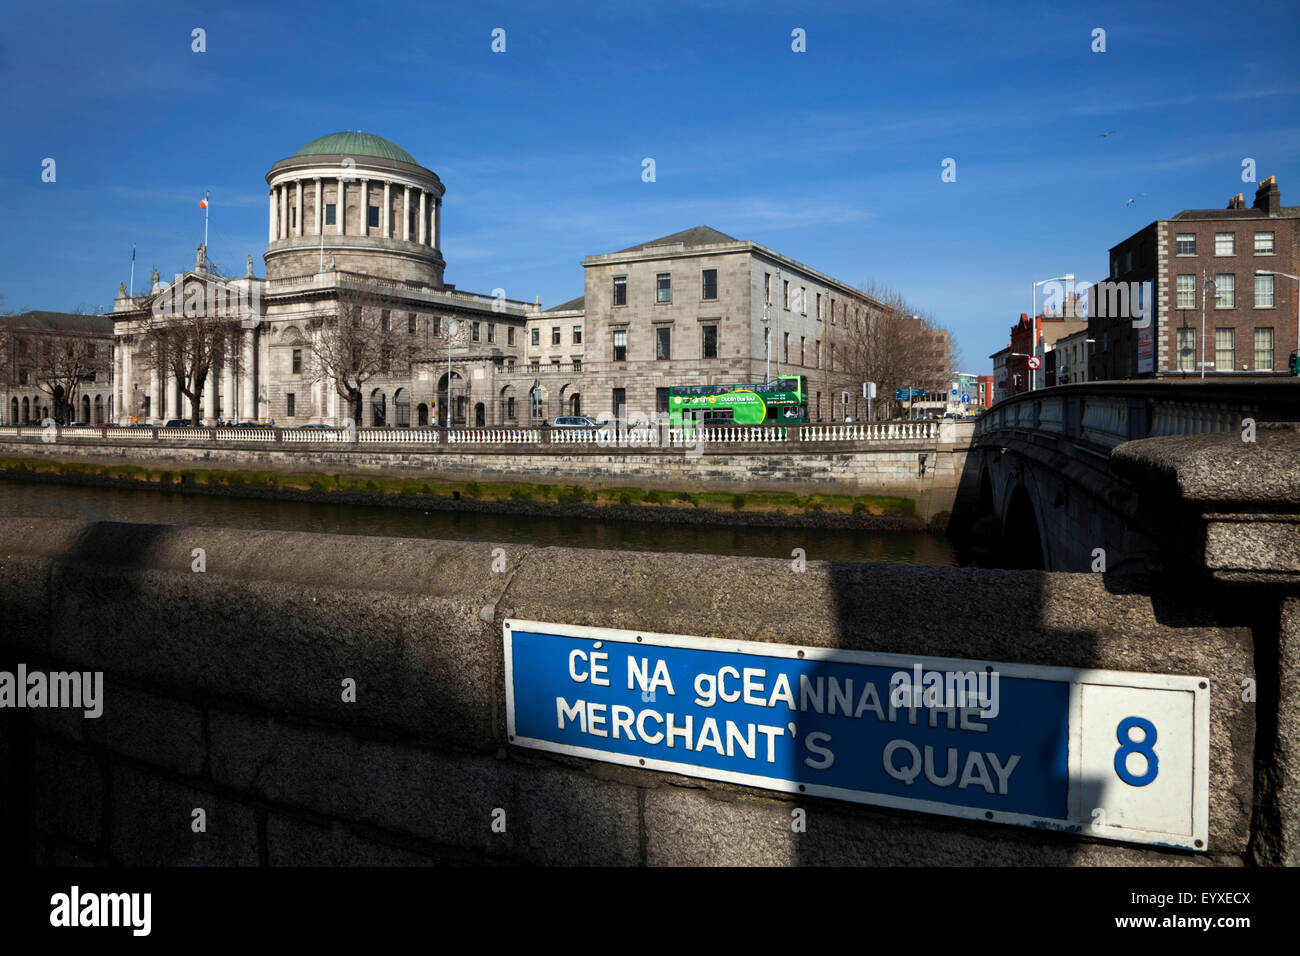 Four Courts of Chancery, King's Bench, Exchequer and Common Pleas designed by James Gandon in 1786. restored after Civil war, Dublin City, Ireland. Stock Photo